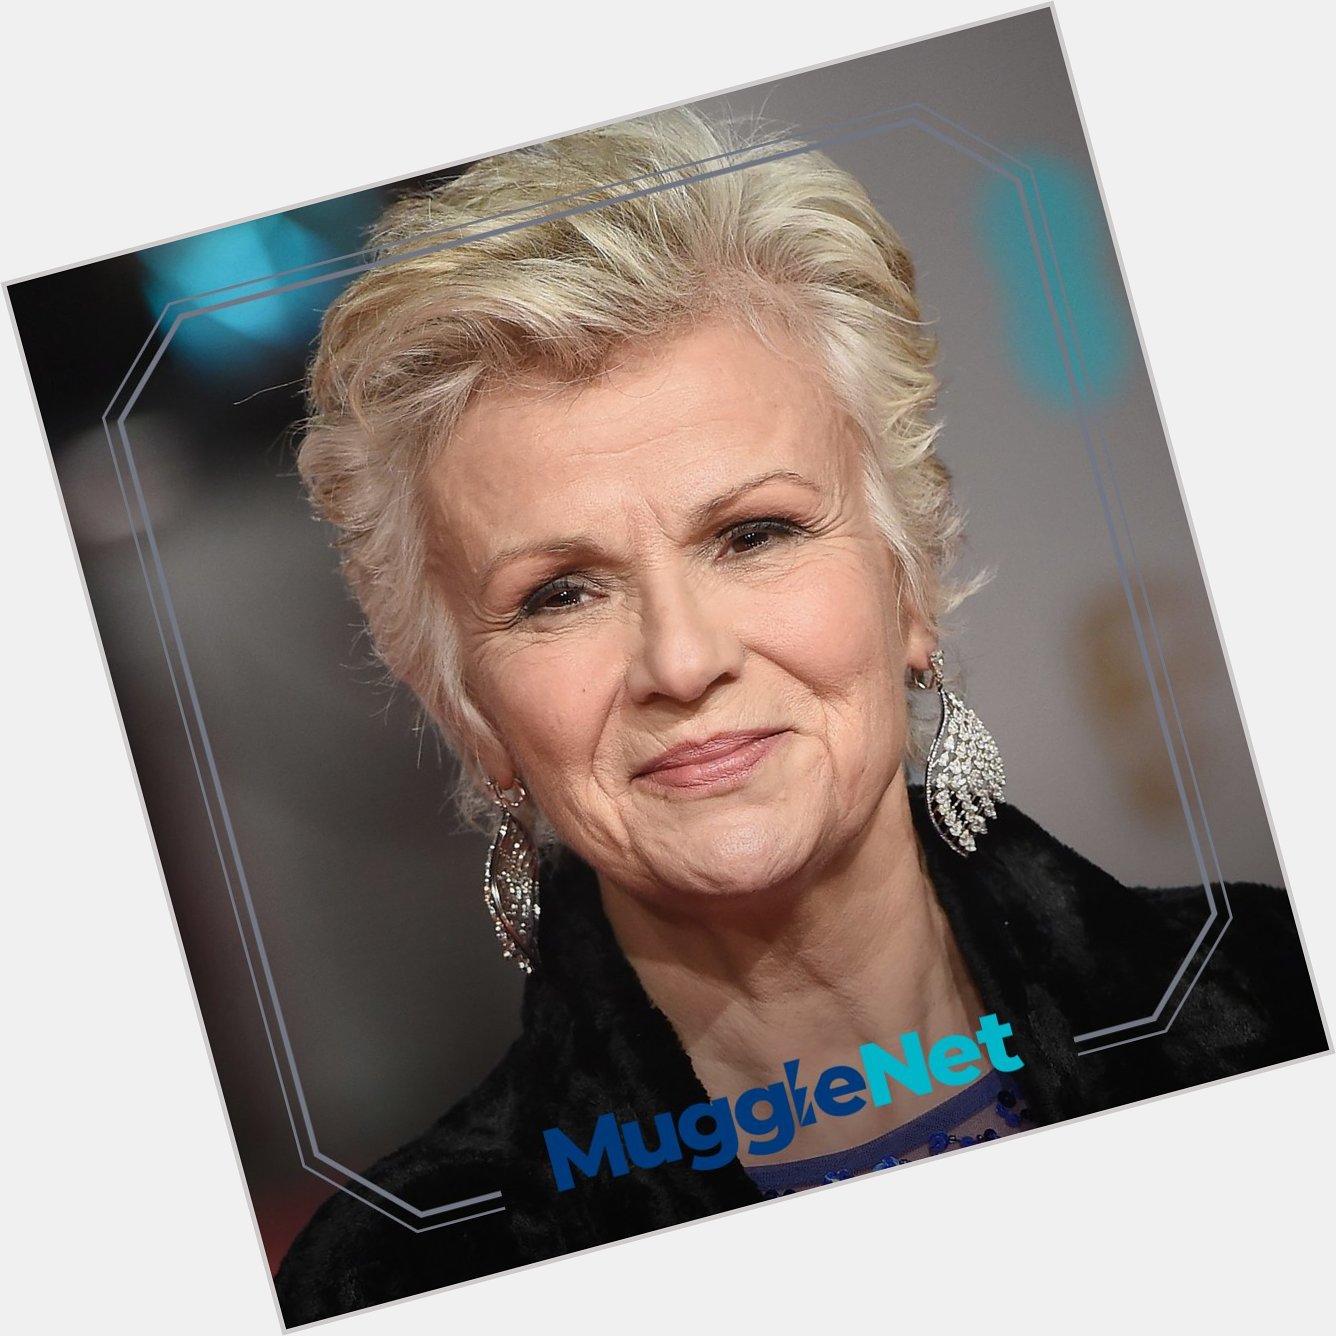 Happy birthday to Julie Walters, who played Molly Weasley in the films! 